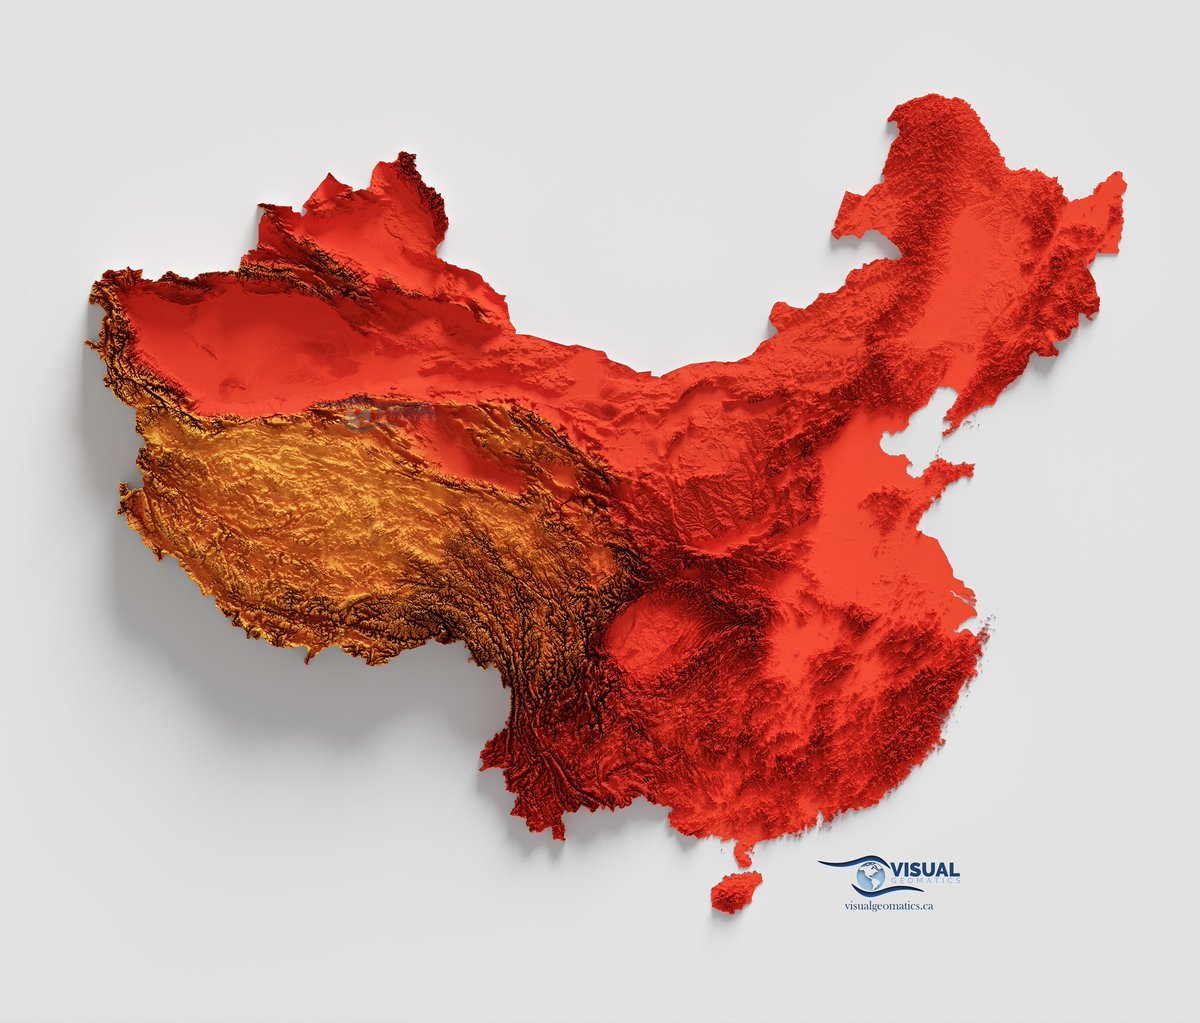 Shaded Relief Map of China.
by @visualwallmaps